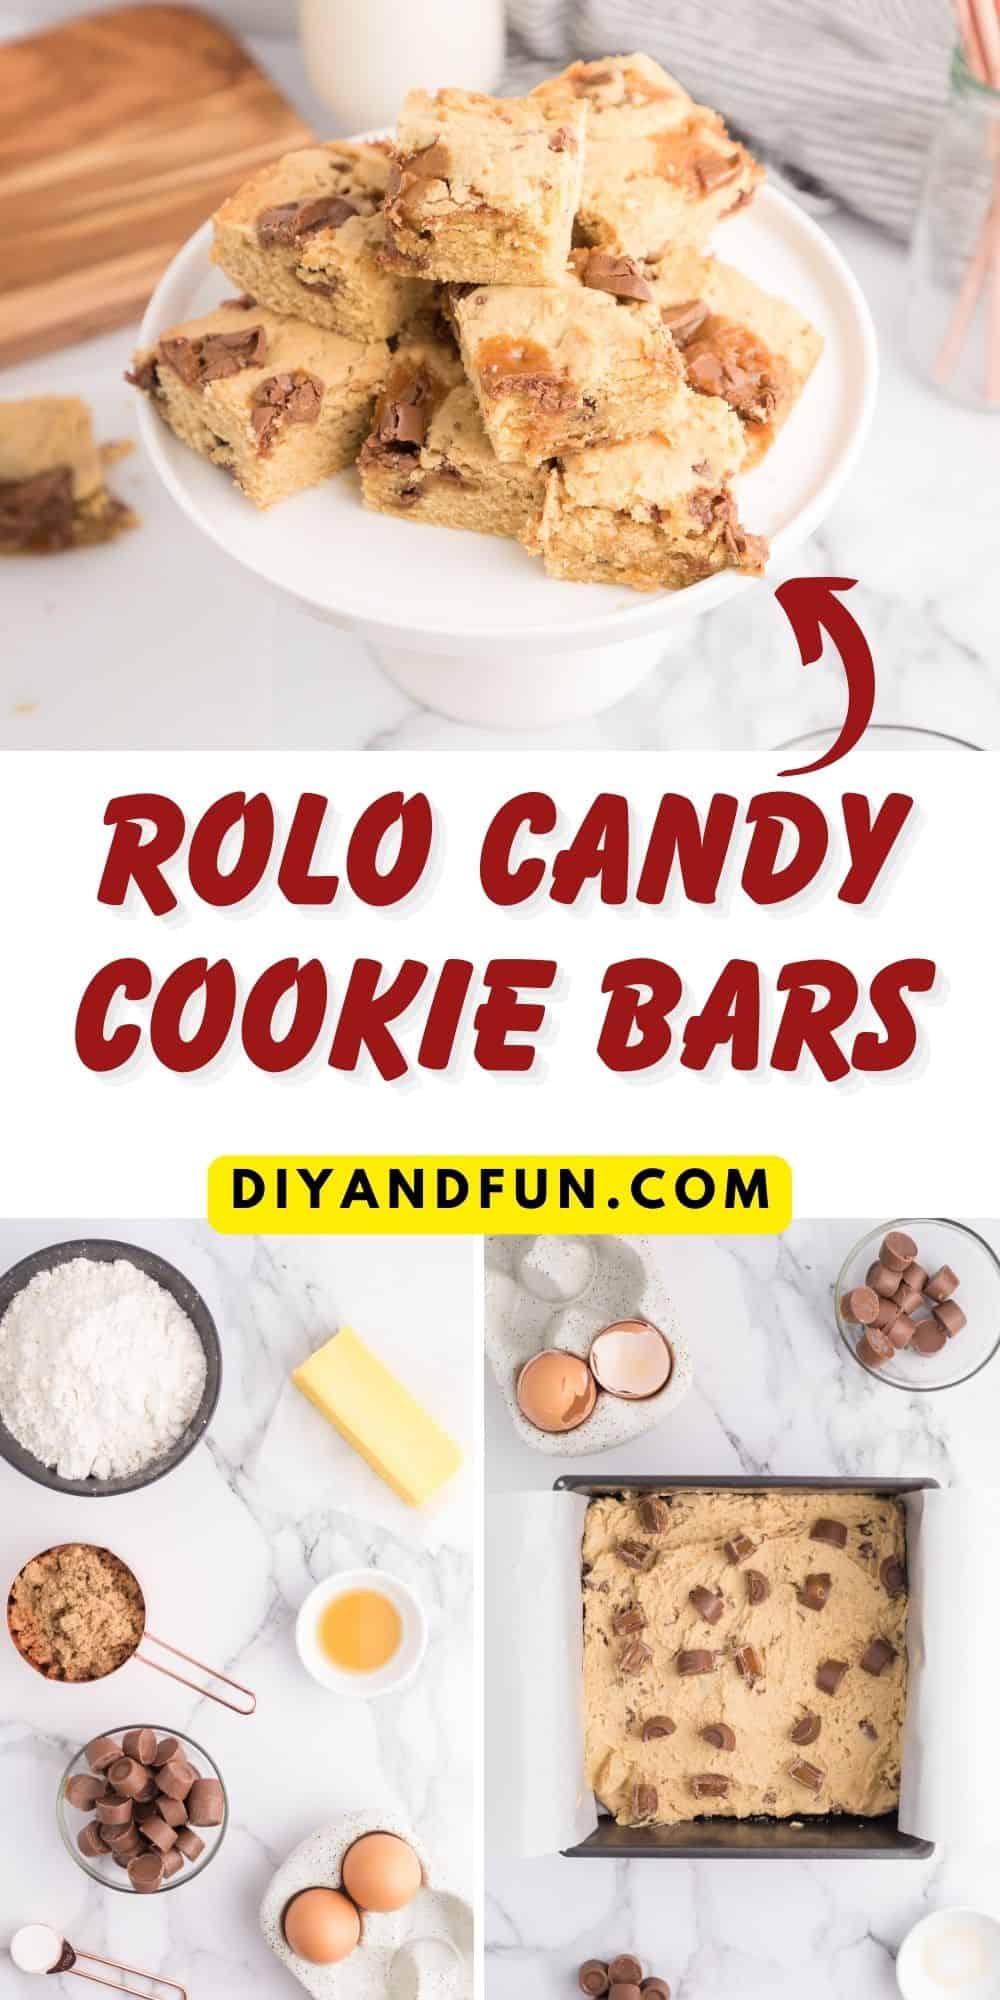 Rolo Candy Cookie Bars, a delicious and easy dessert recipe made with cookie dough stuffed with the gooey caramel and chocolate Rolo candies.